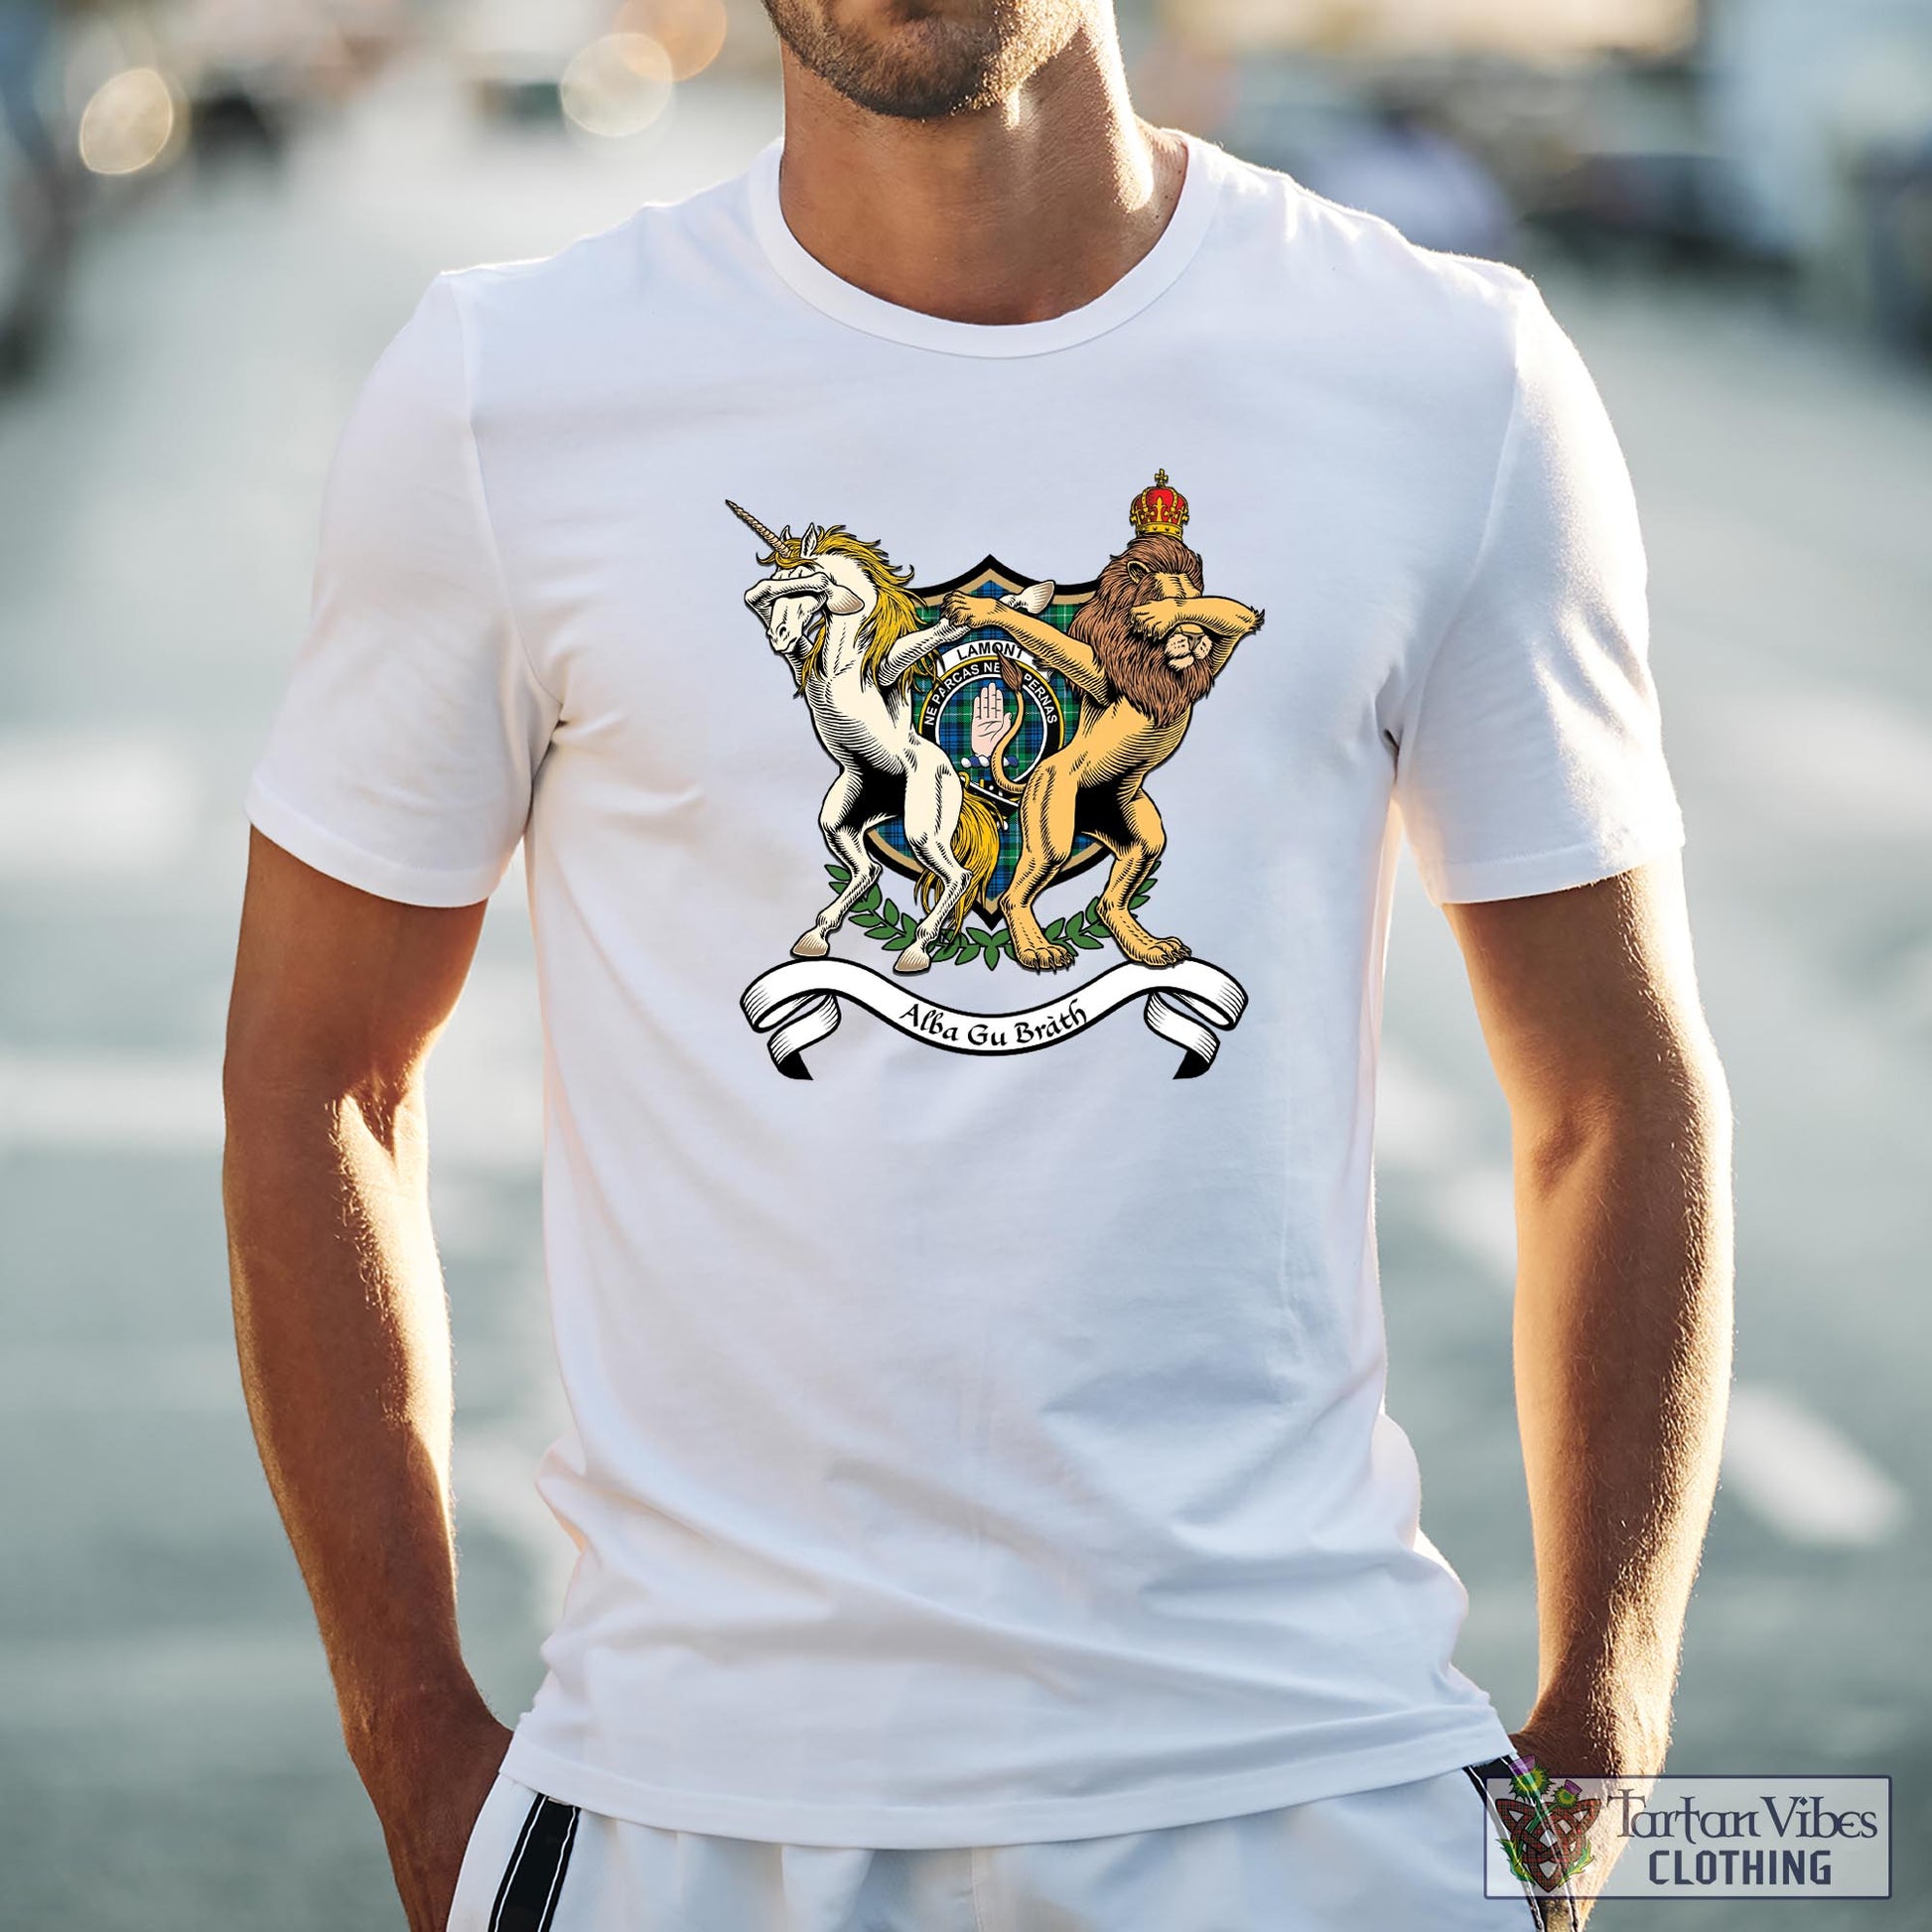 Tartan Vibes Clothing Lamont Ancient Family Crest Cotton Men's T-Shirt with Scotland Royal Coat Of Arm Funny Style